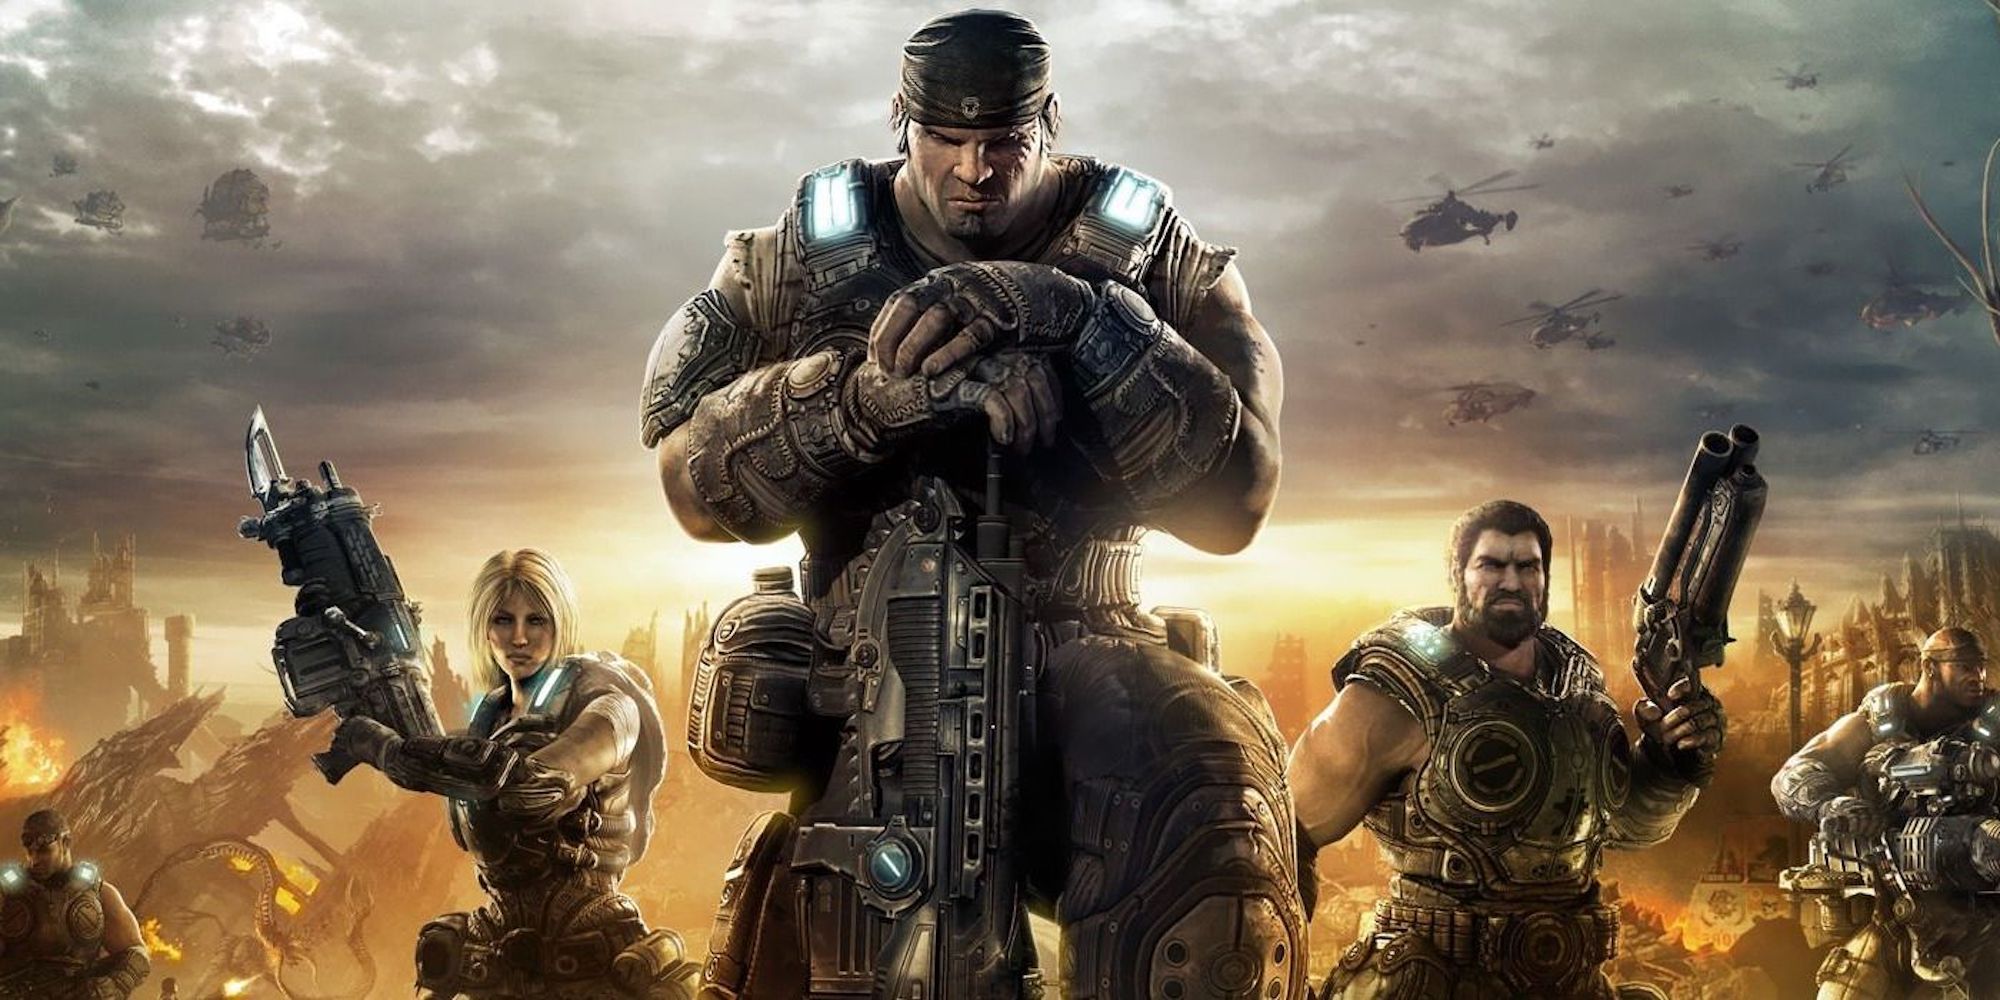 Promo art featuring characters from Gears of War